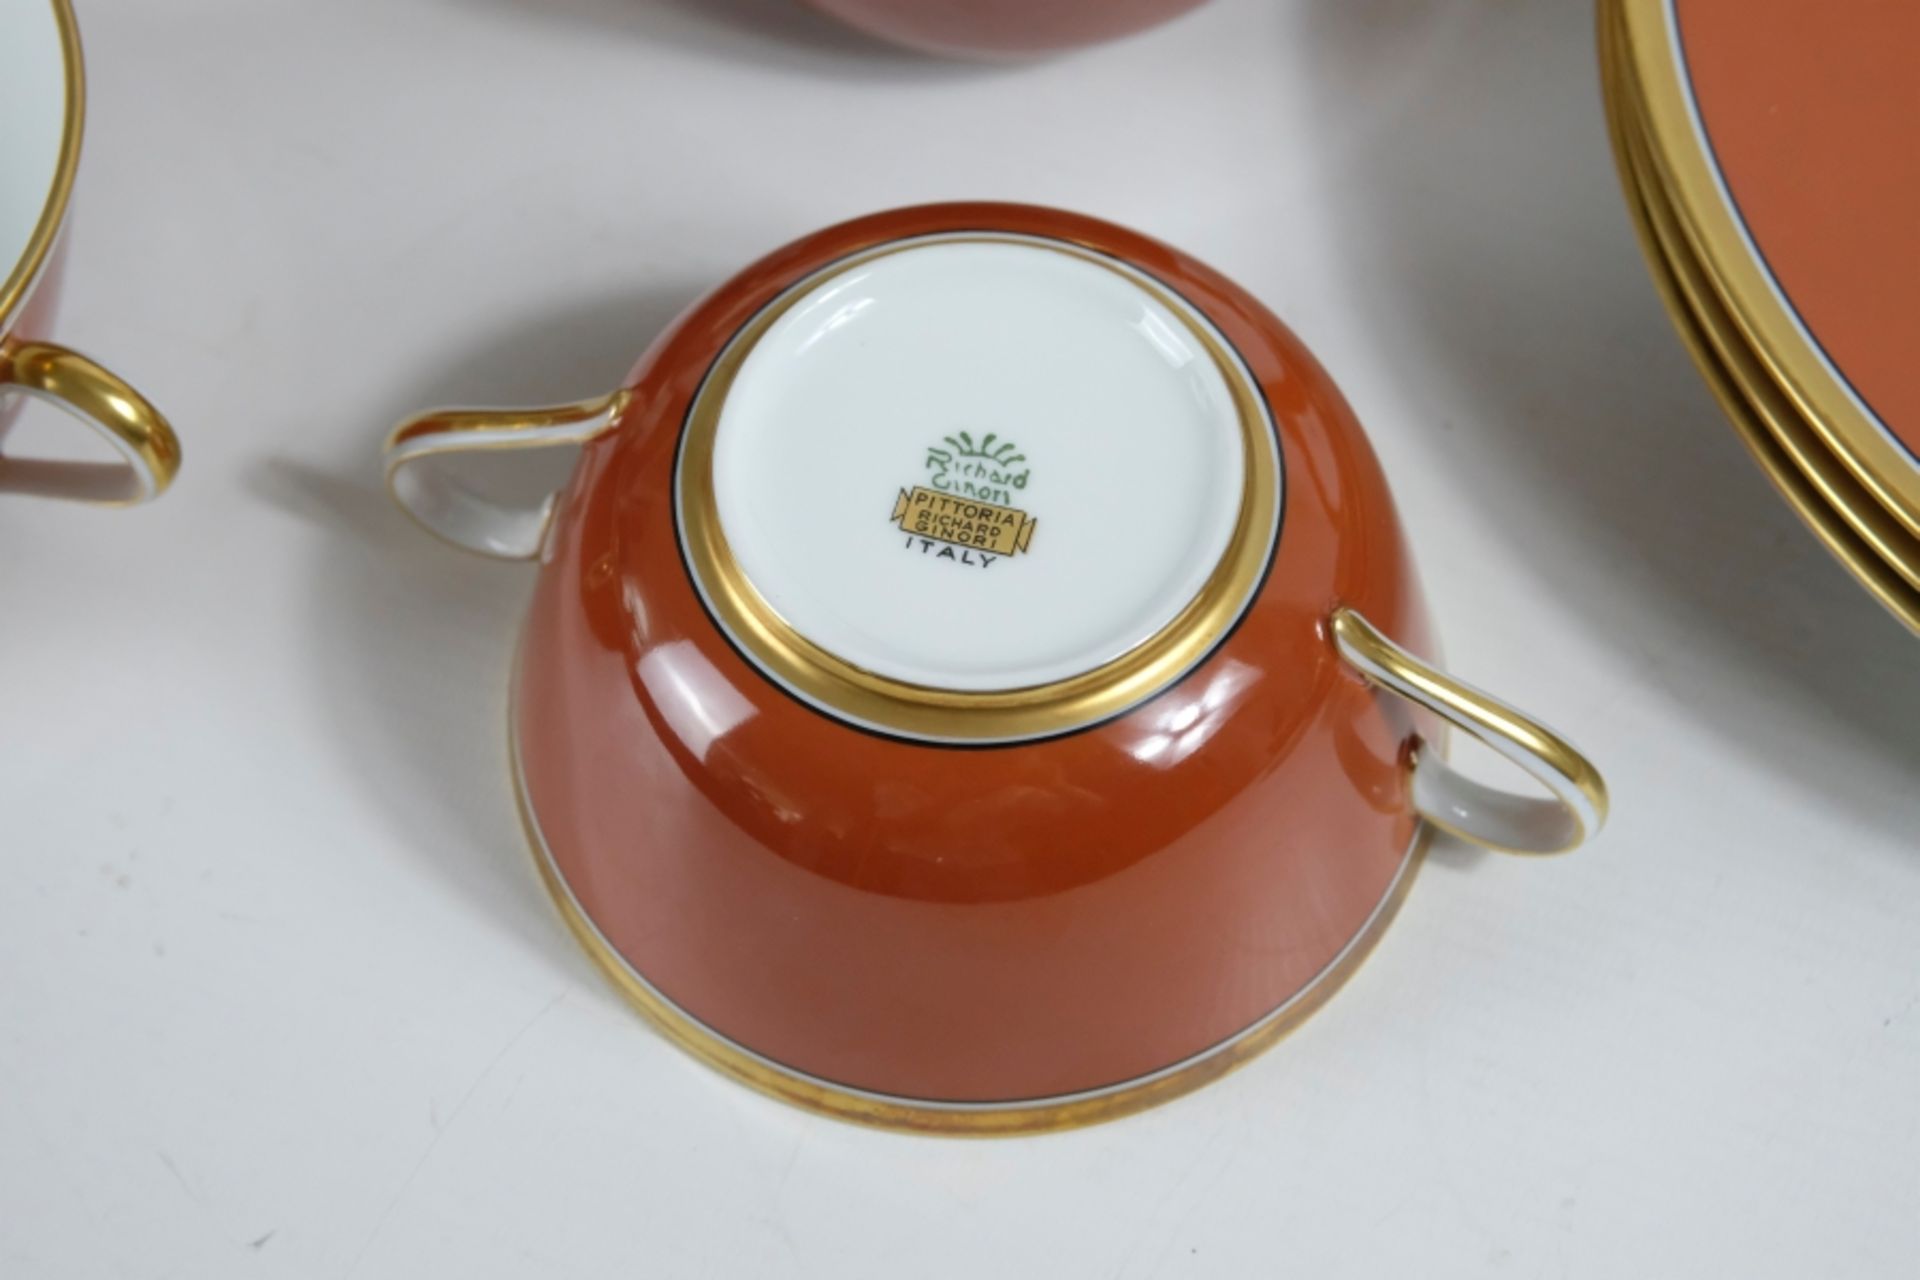 Richard Ginori "Contessa" dinner service, porcelain, white and terracotta with gold rim, consisting - Image 6 of 8